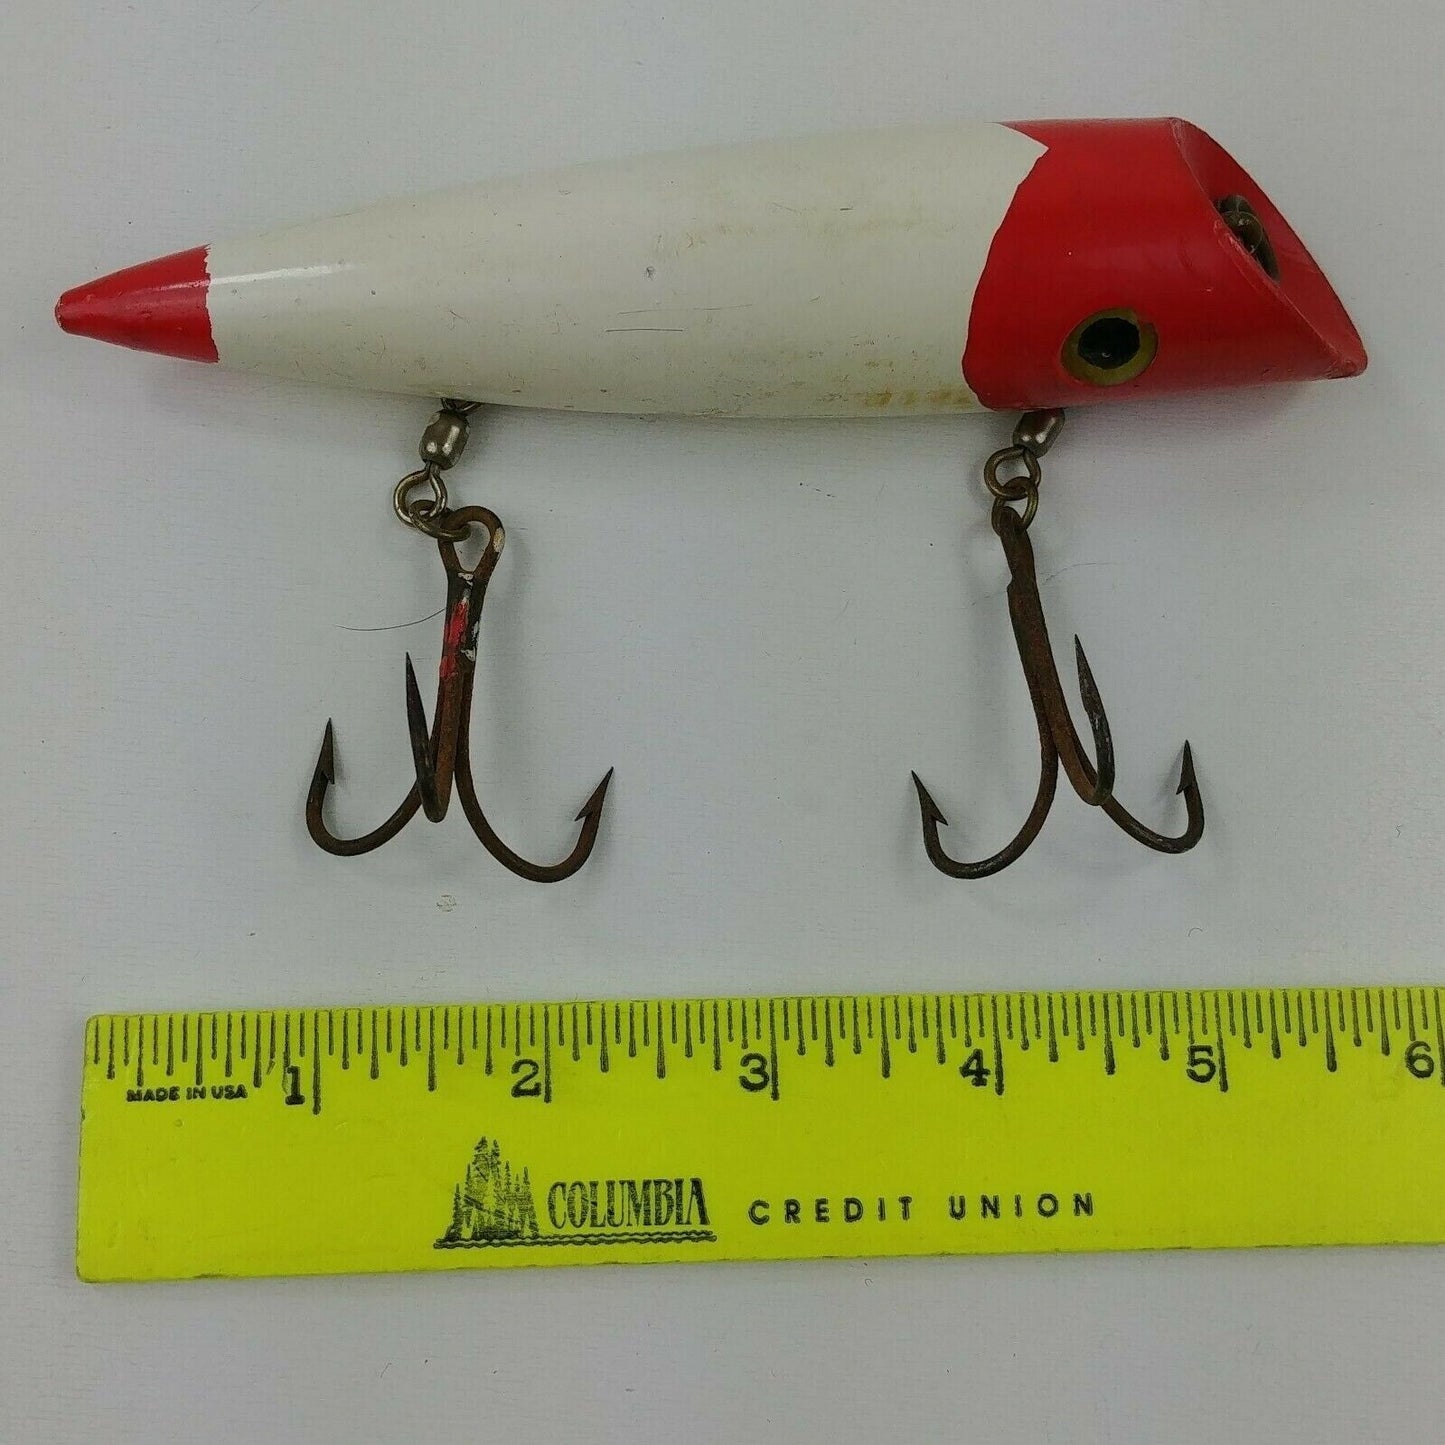 Vintage Large Red Wood Lure Red White Head & Tail - 6" Total Length